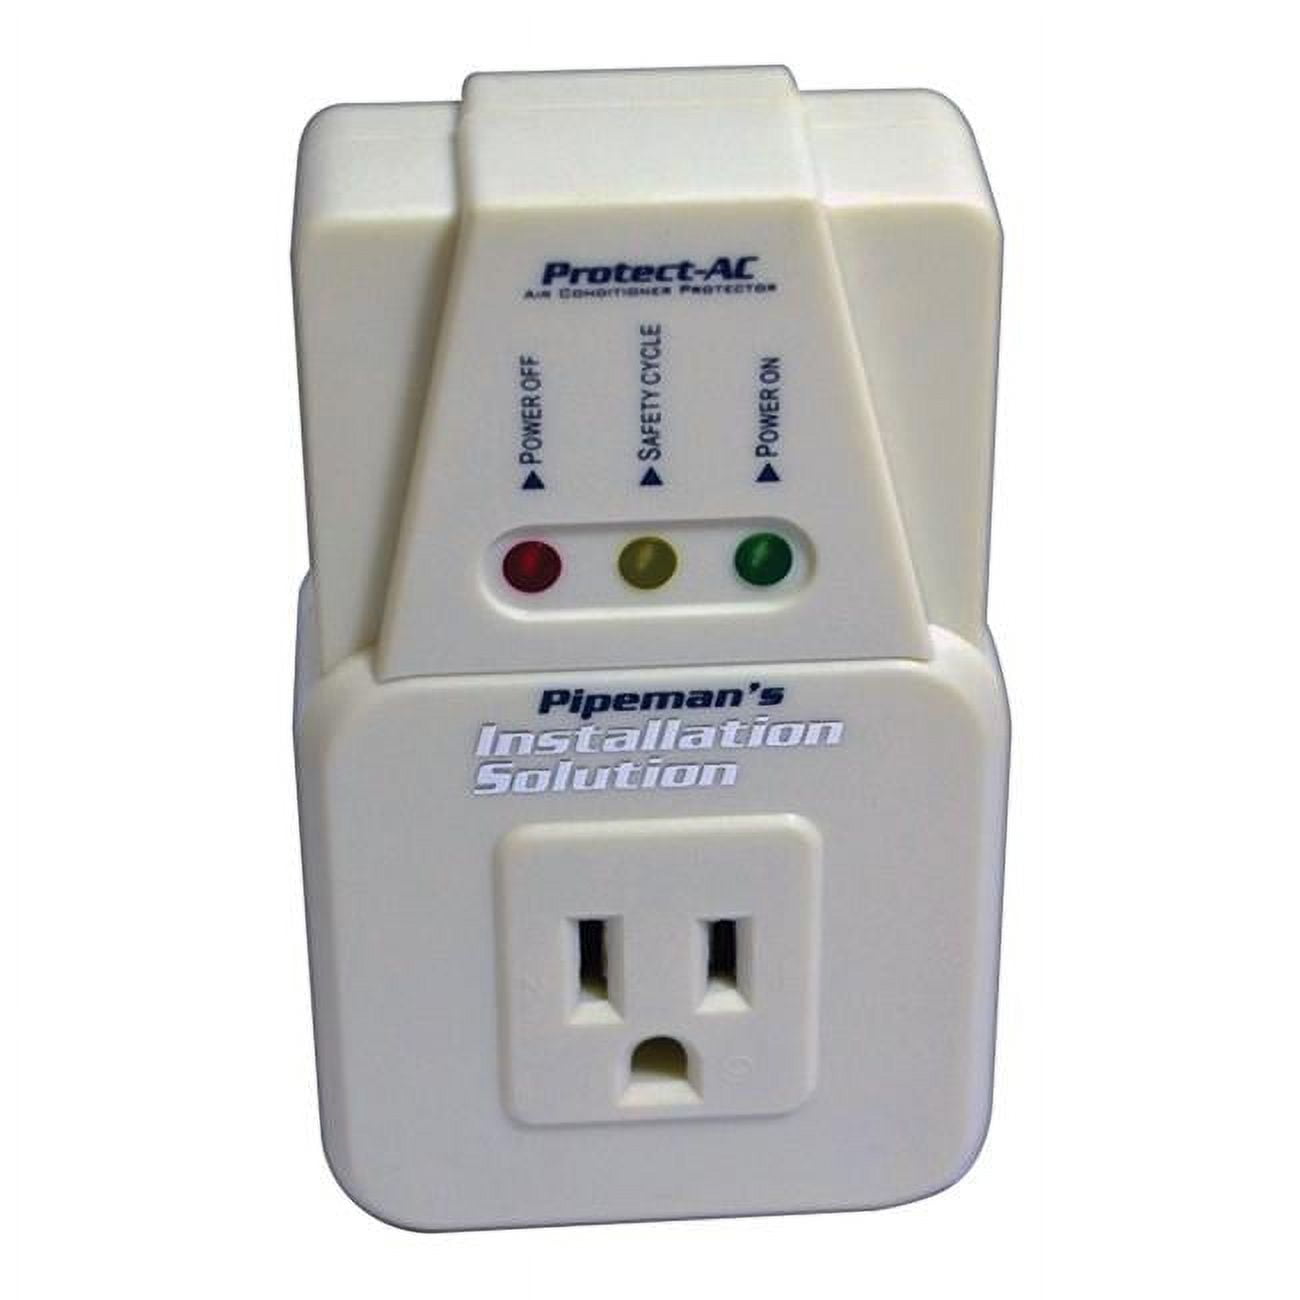 Nippon PROTECTAC Appliance Surge Protector 